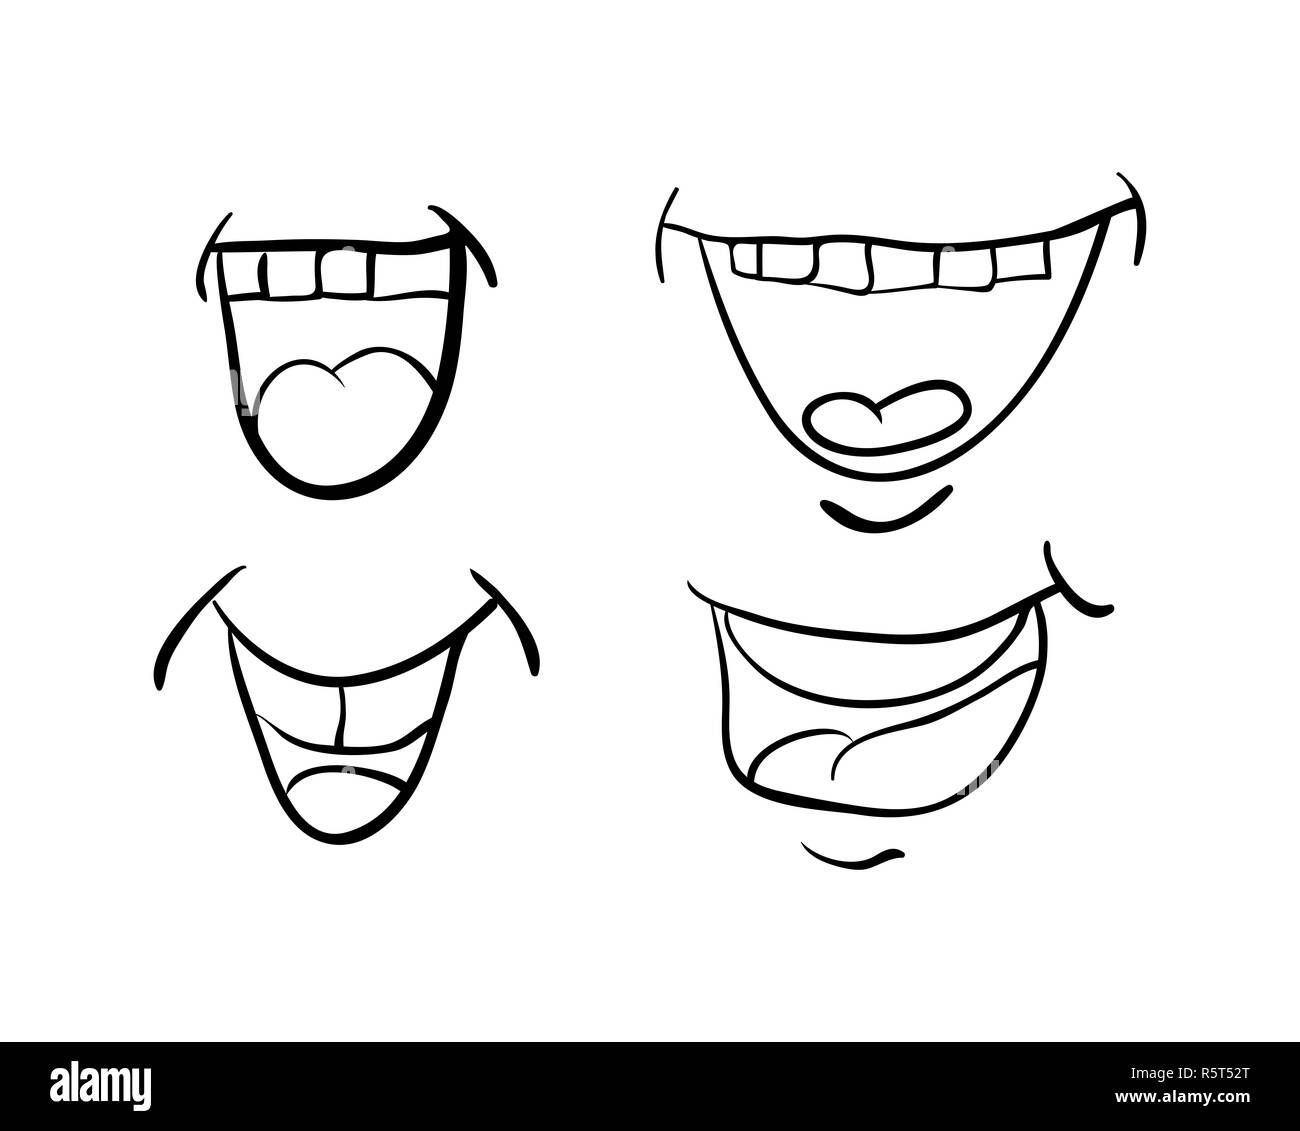 cartoon mouth with tongue and teeth set vector symbol icon design.  Beautiful illustration isolated on white background Stock Photo - Alamy